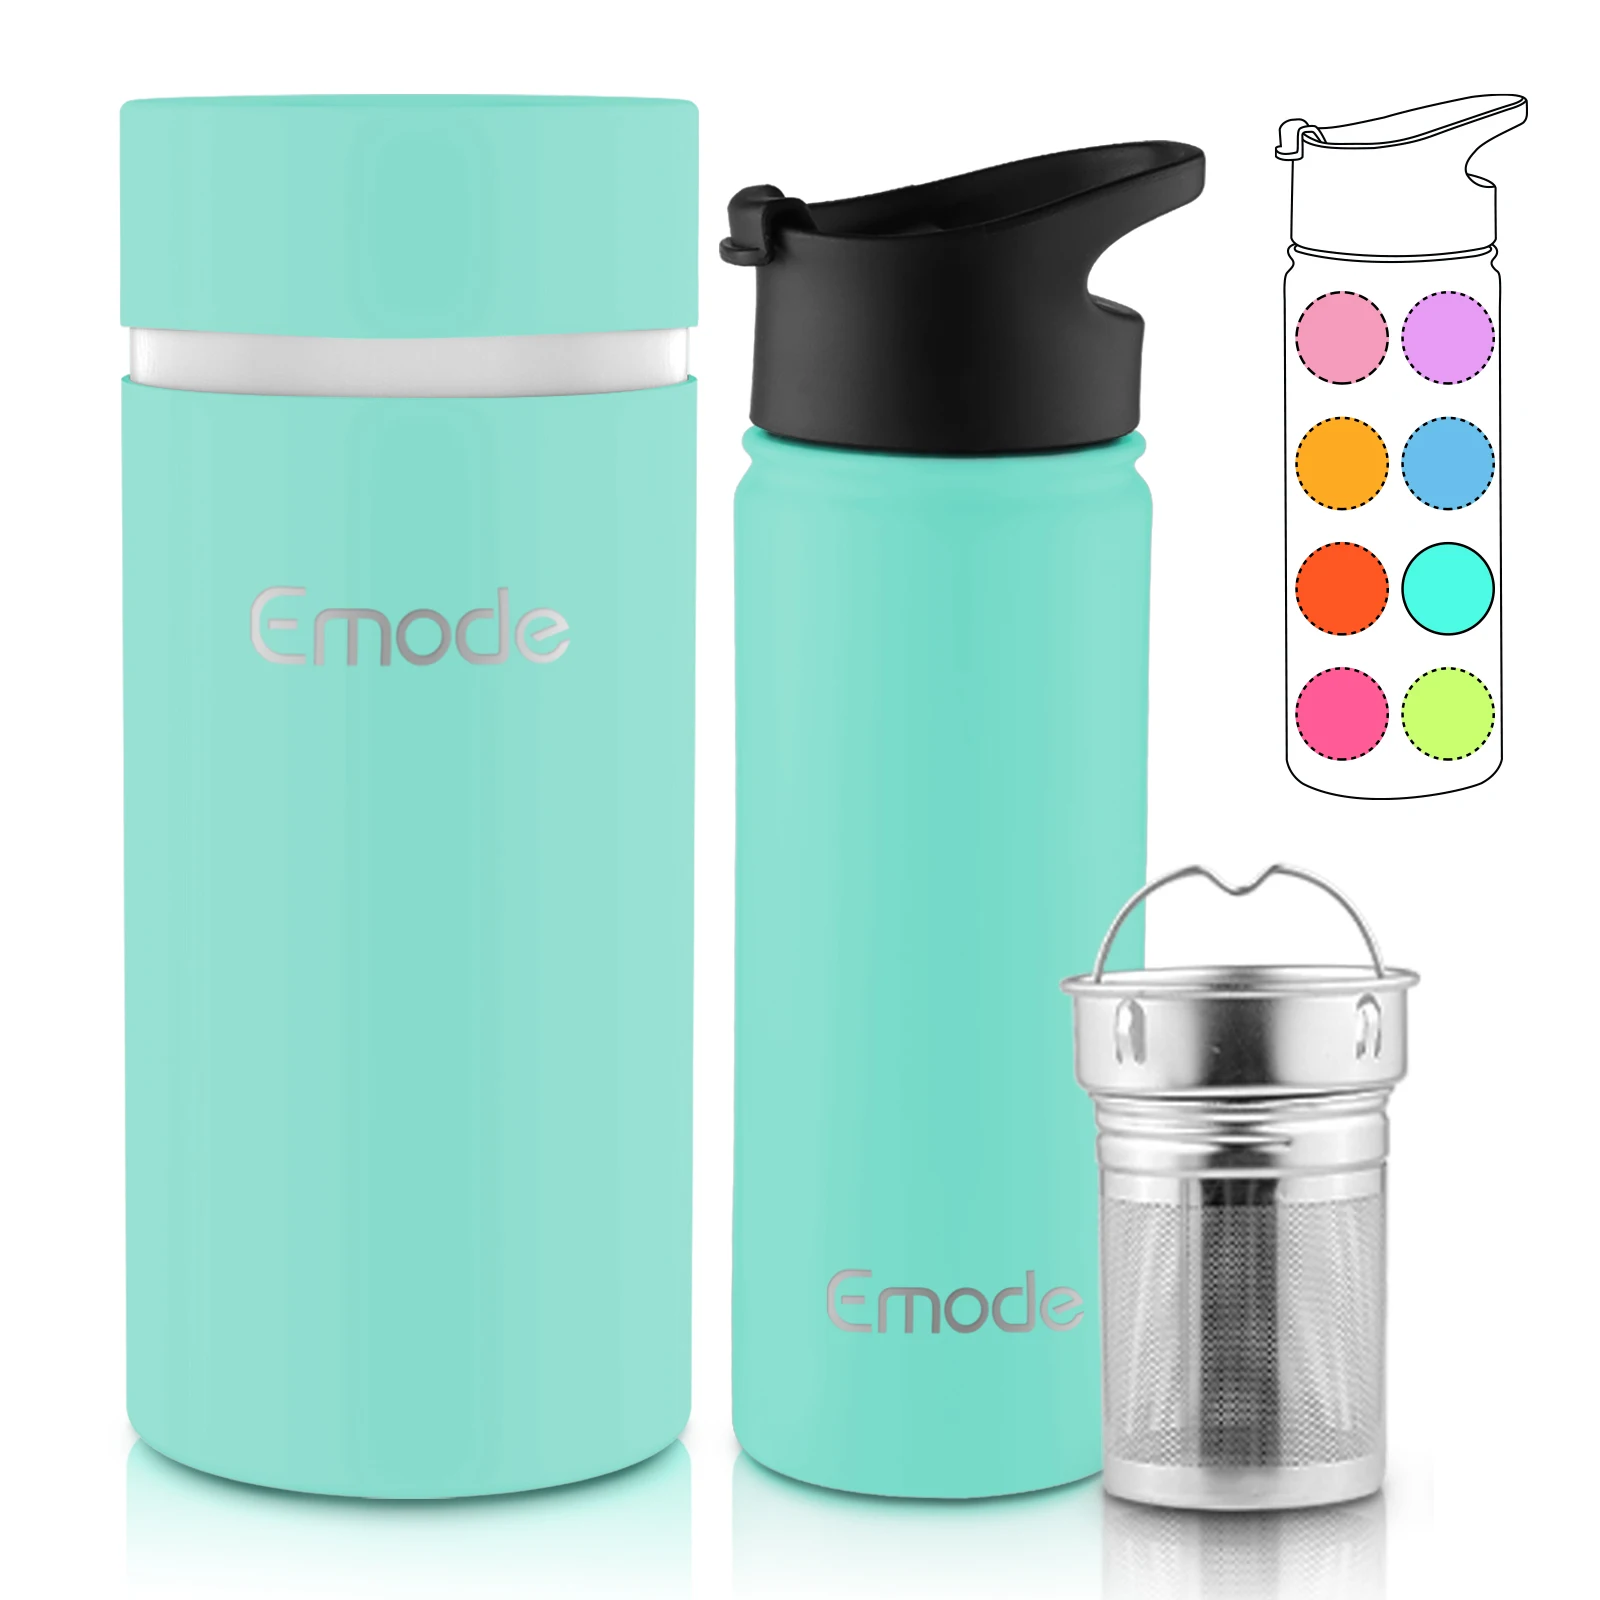 

RCS Recycled 18 oz Stainless Steel Insulated Tea Travel Thermo Mug To Go for Loose Tea With Removable Tea Infuser Strainer